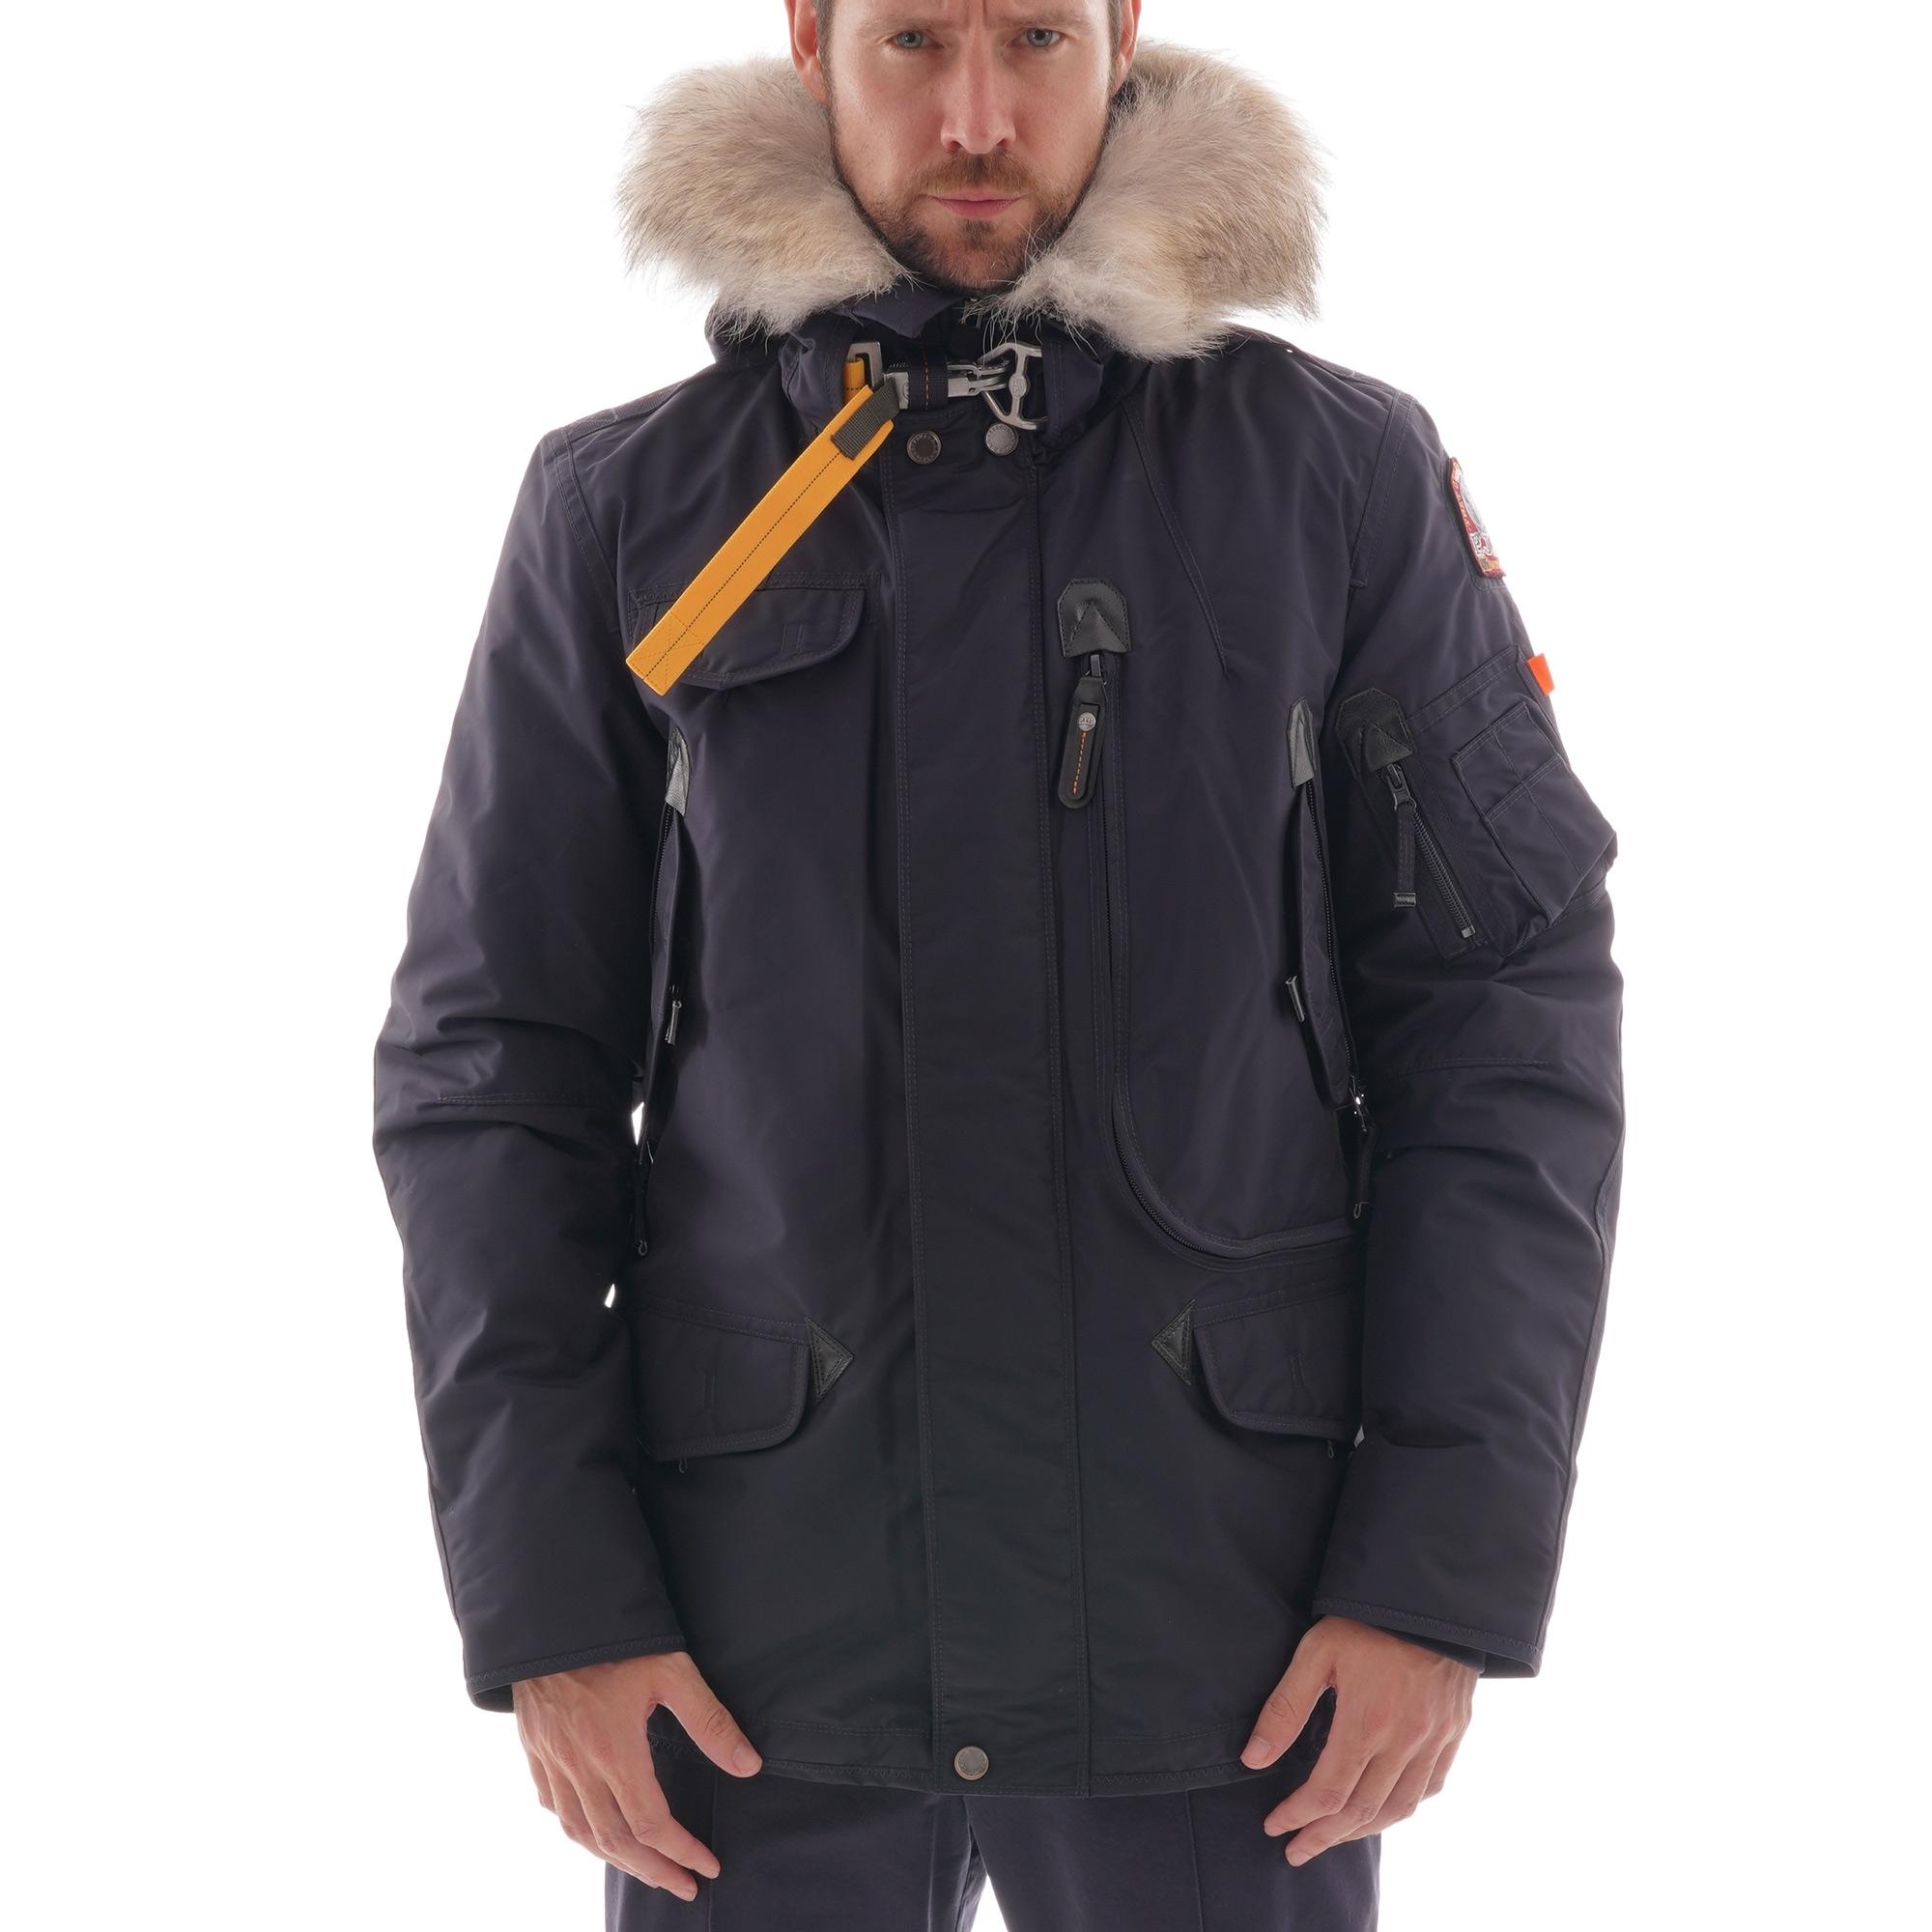 Parajumpers Right Hand Jacket in Navy (Blue) for Men - Save 17% - Lyst